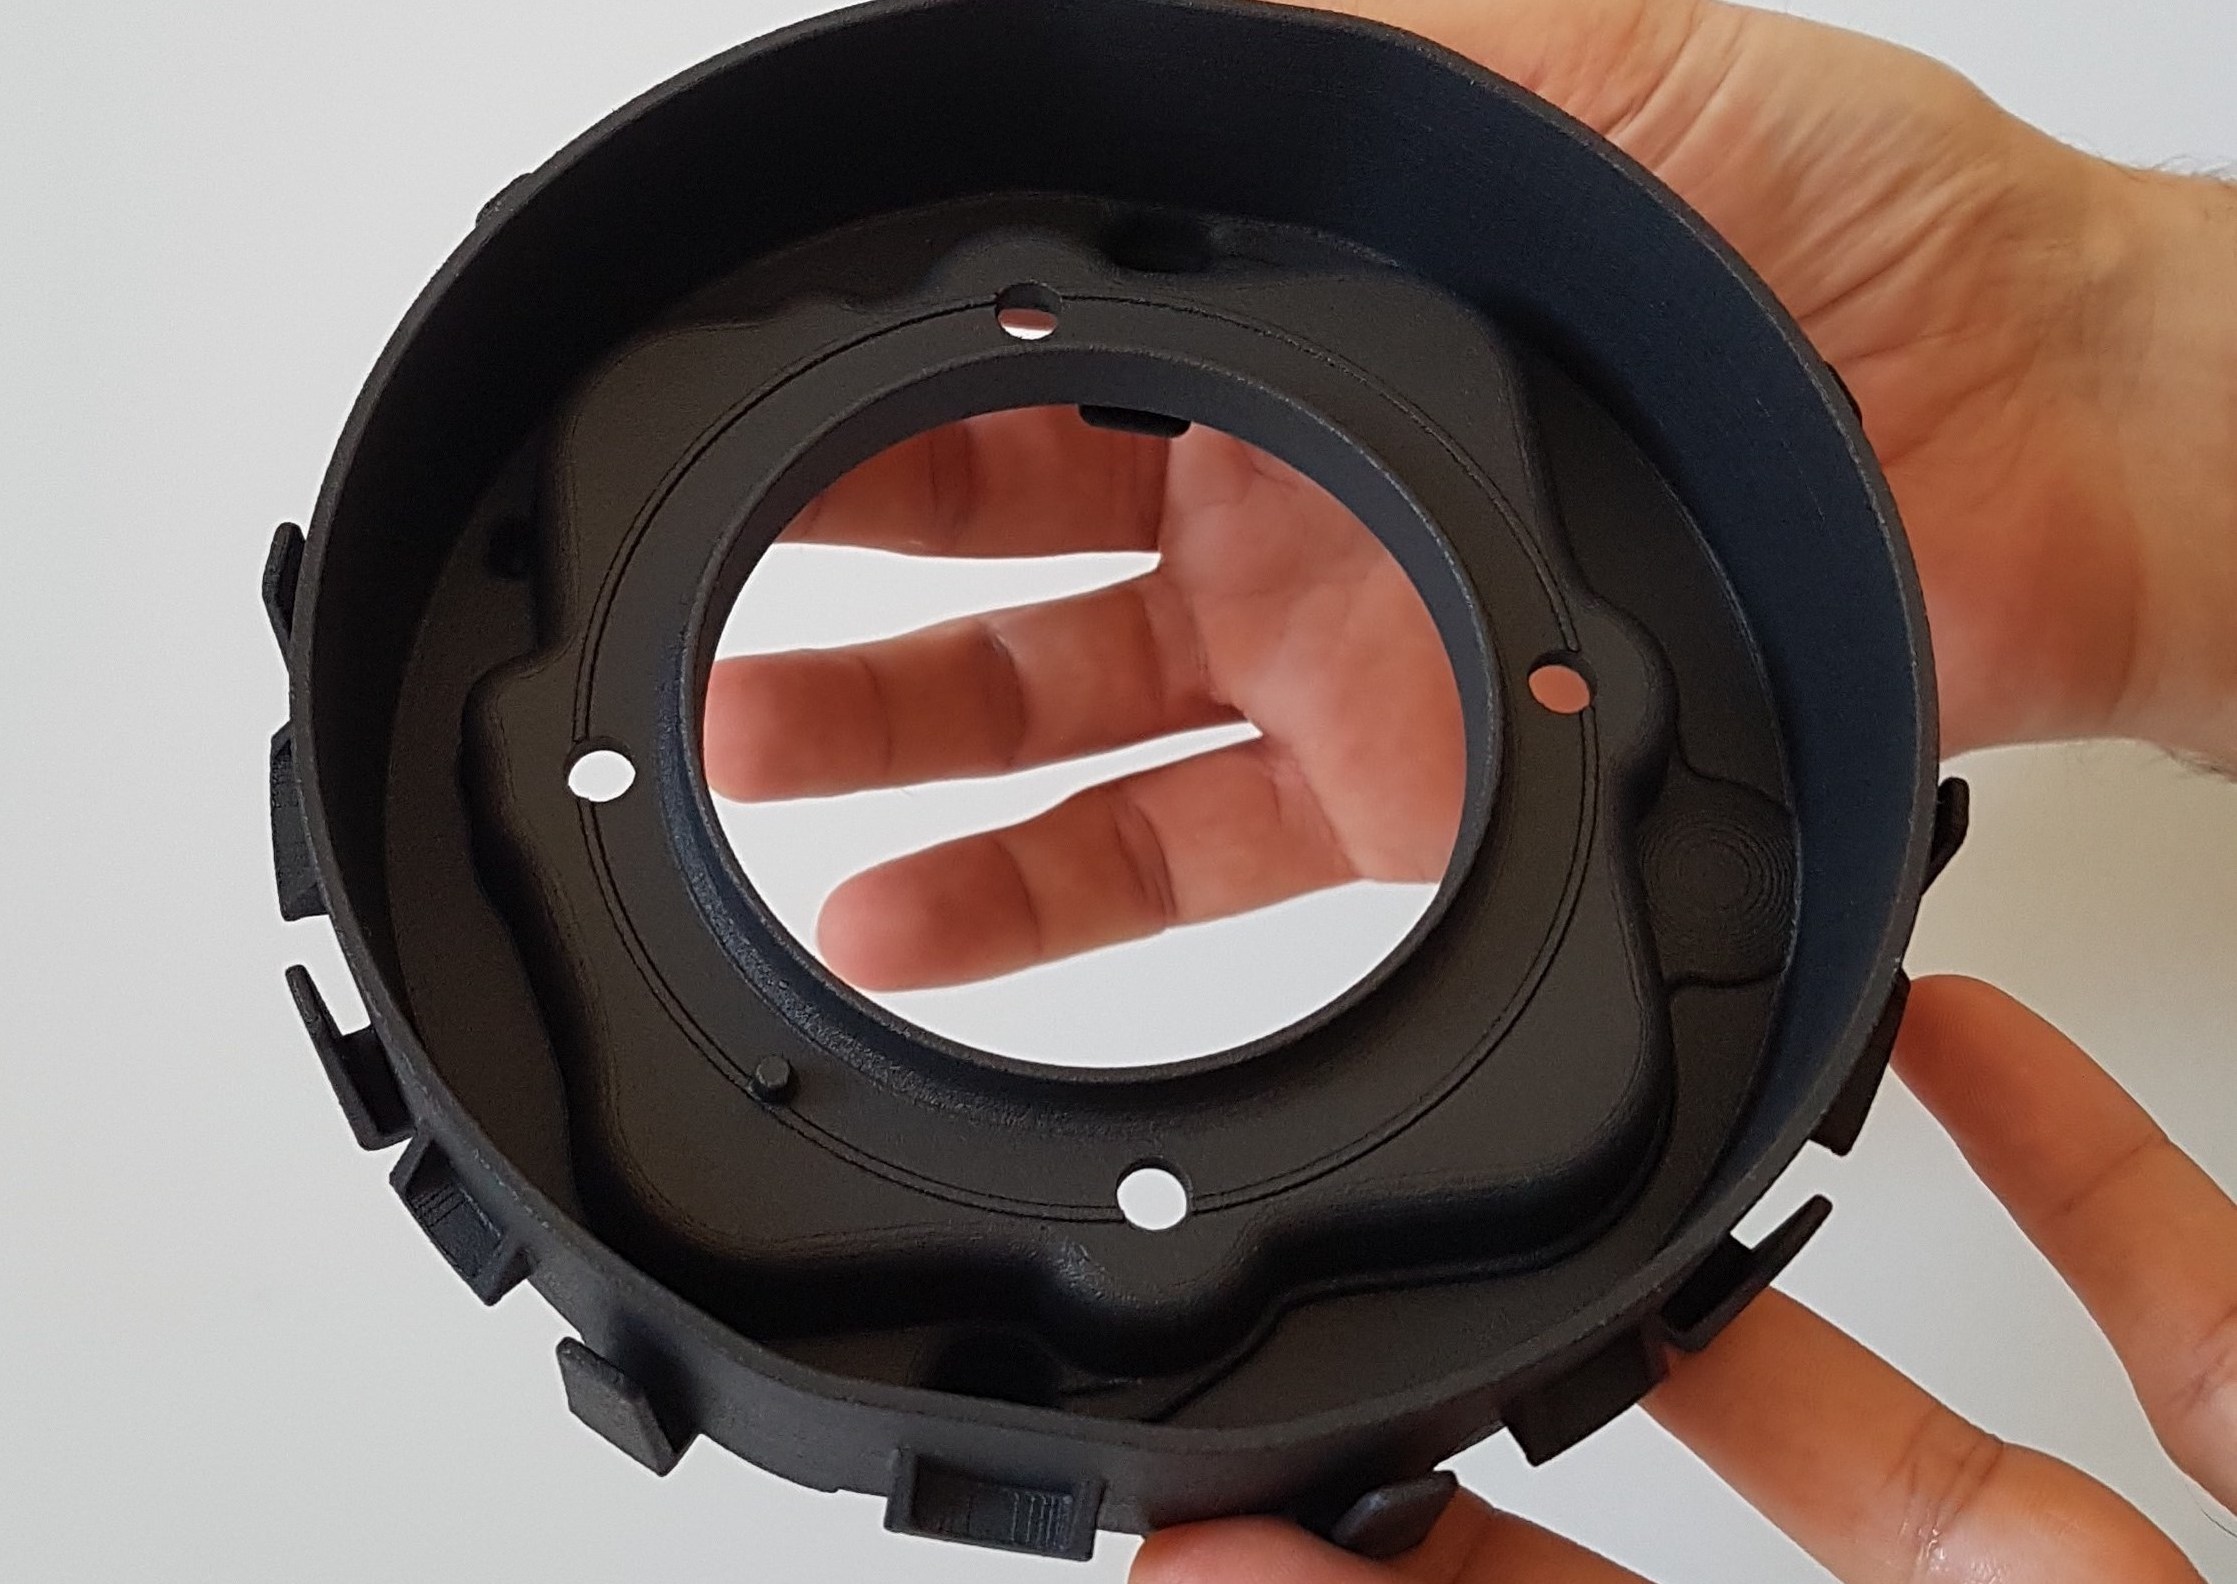 CRP Technology's have been utilized to print a range of functional parts including Joyson Safety Systems' 3D printed Airbag housing (pictured). Photo via CRP Technology.